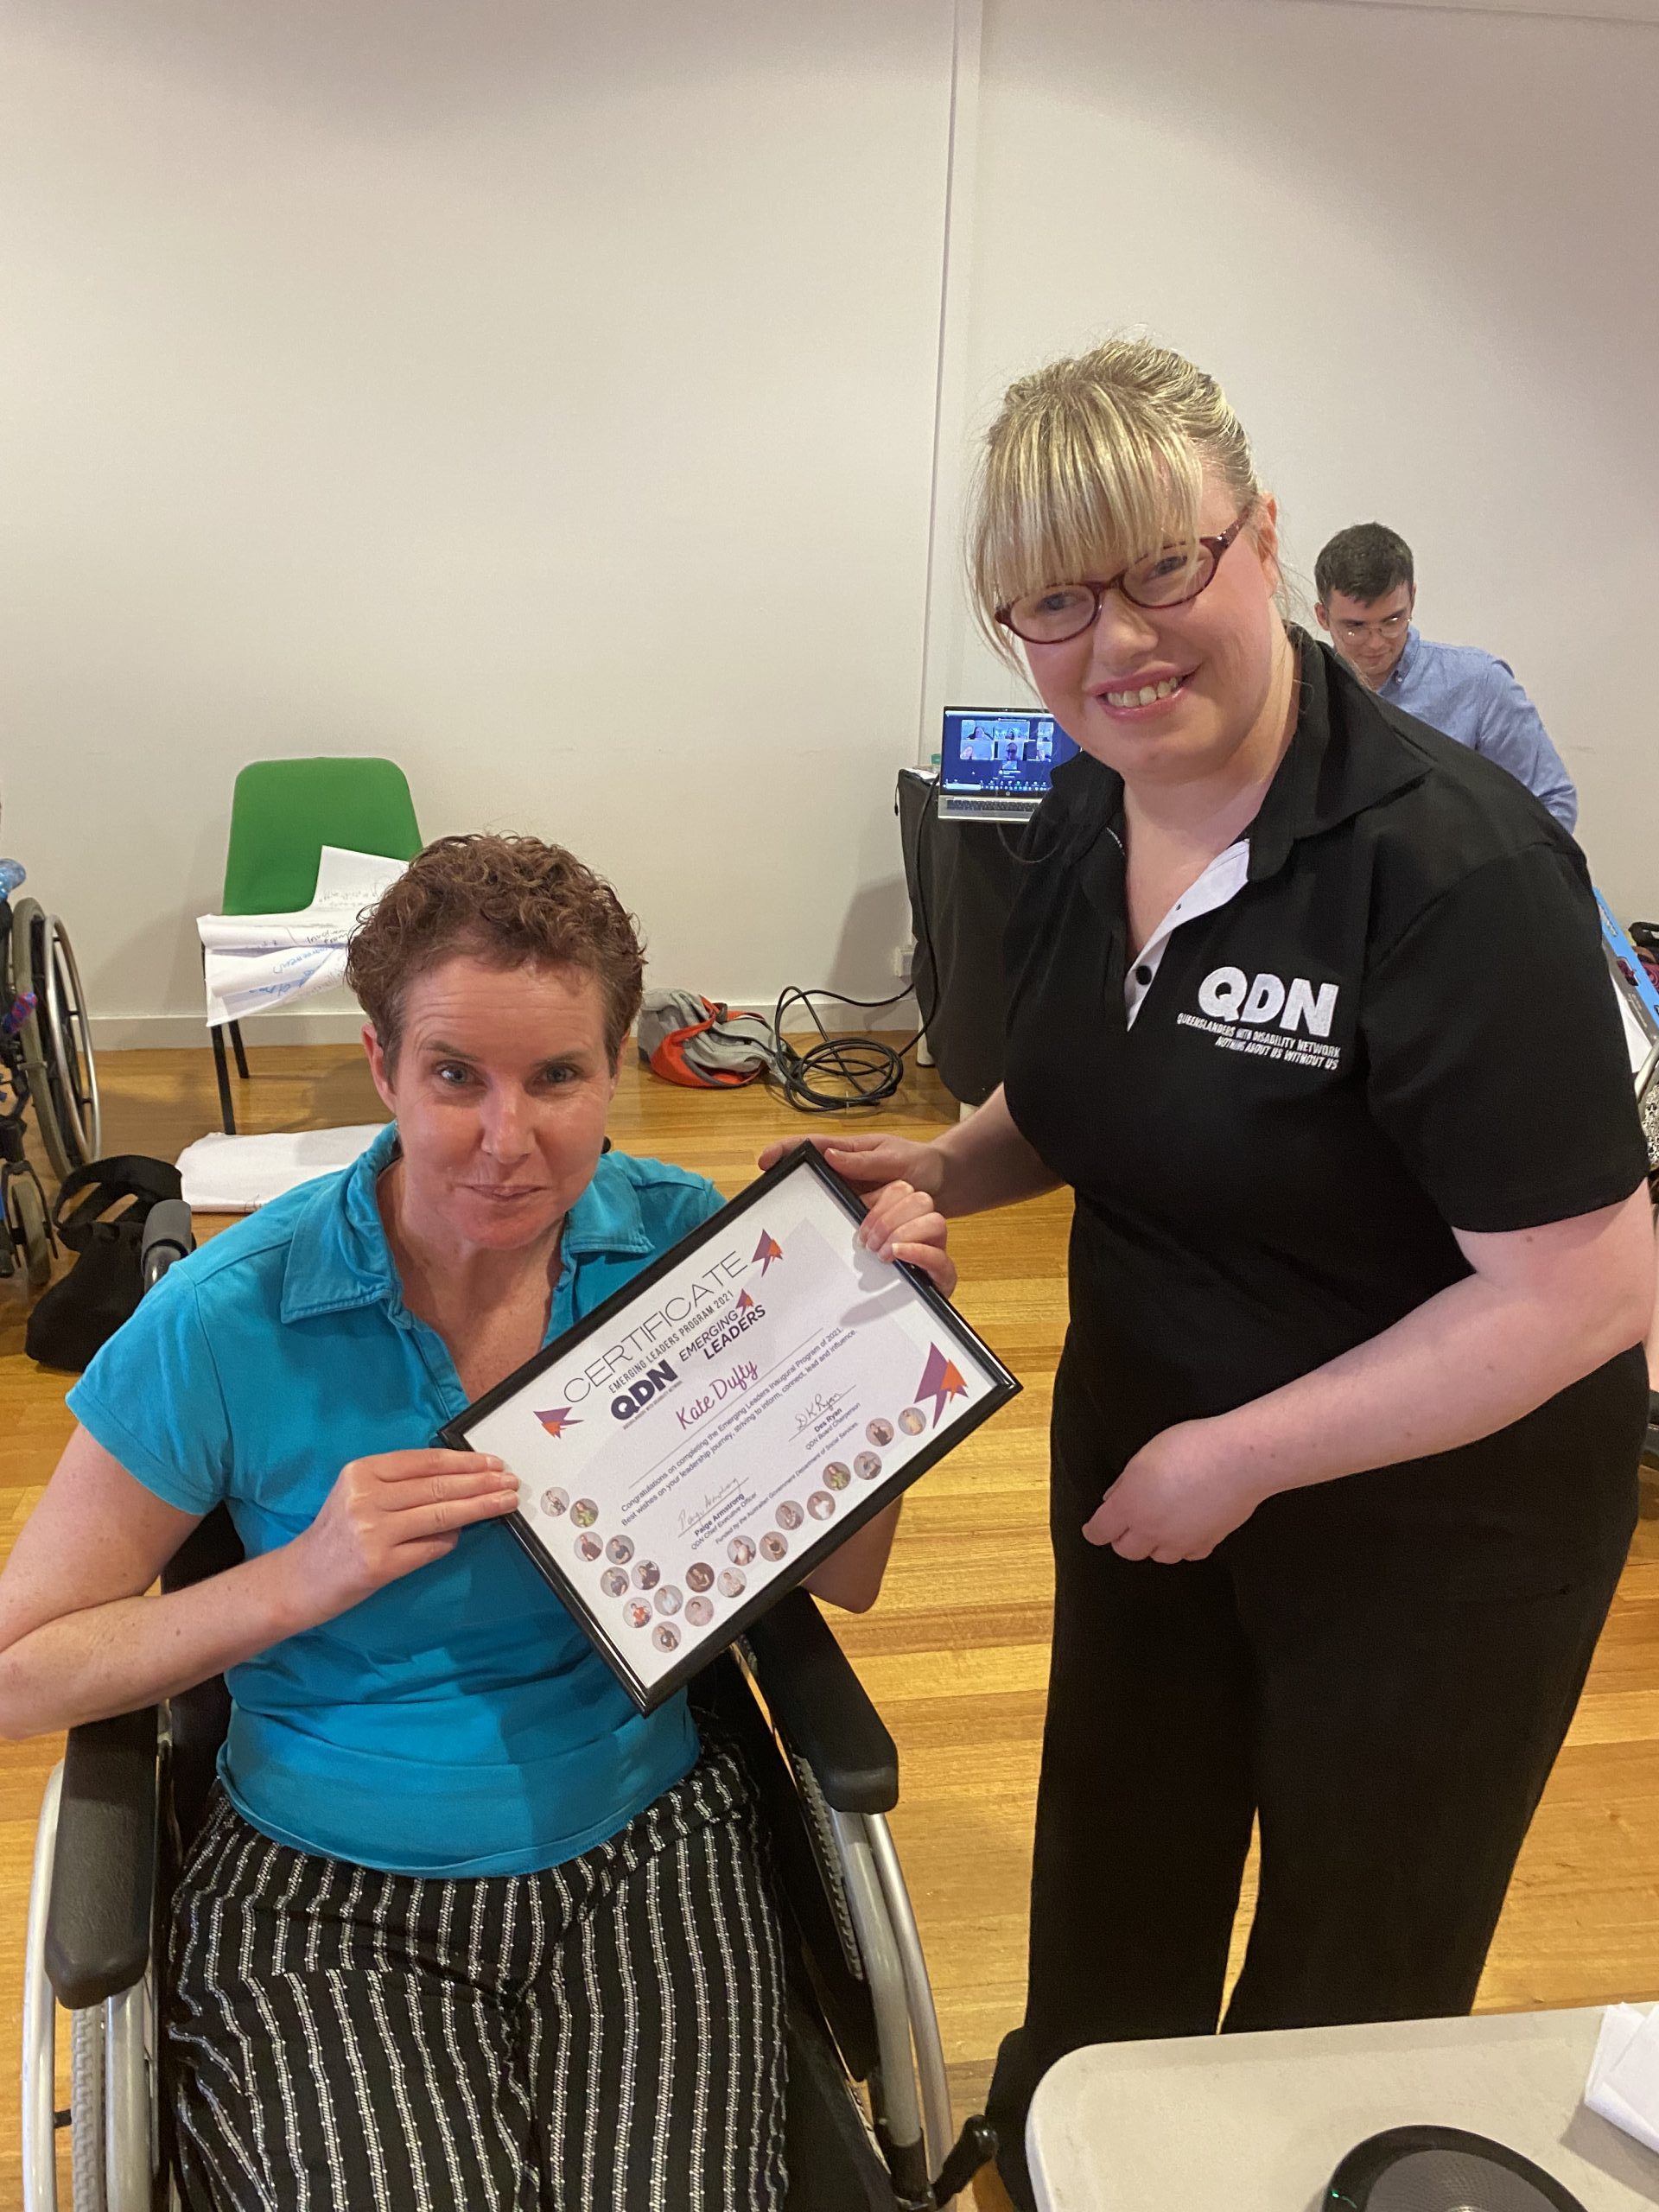 A lady wearing a bright blue shirt sitting in a wheelchair and another lady in a QDN shirt standing next to her handing her a framed certificate. They are both looking at the camera smiling.